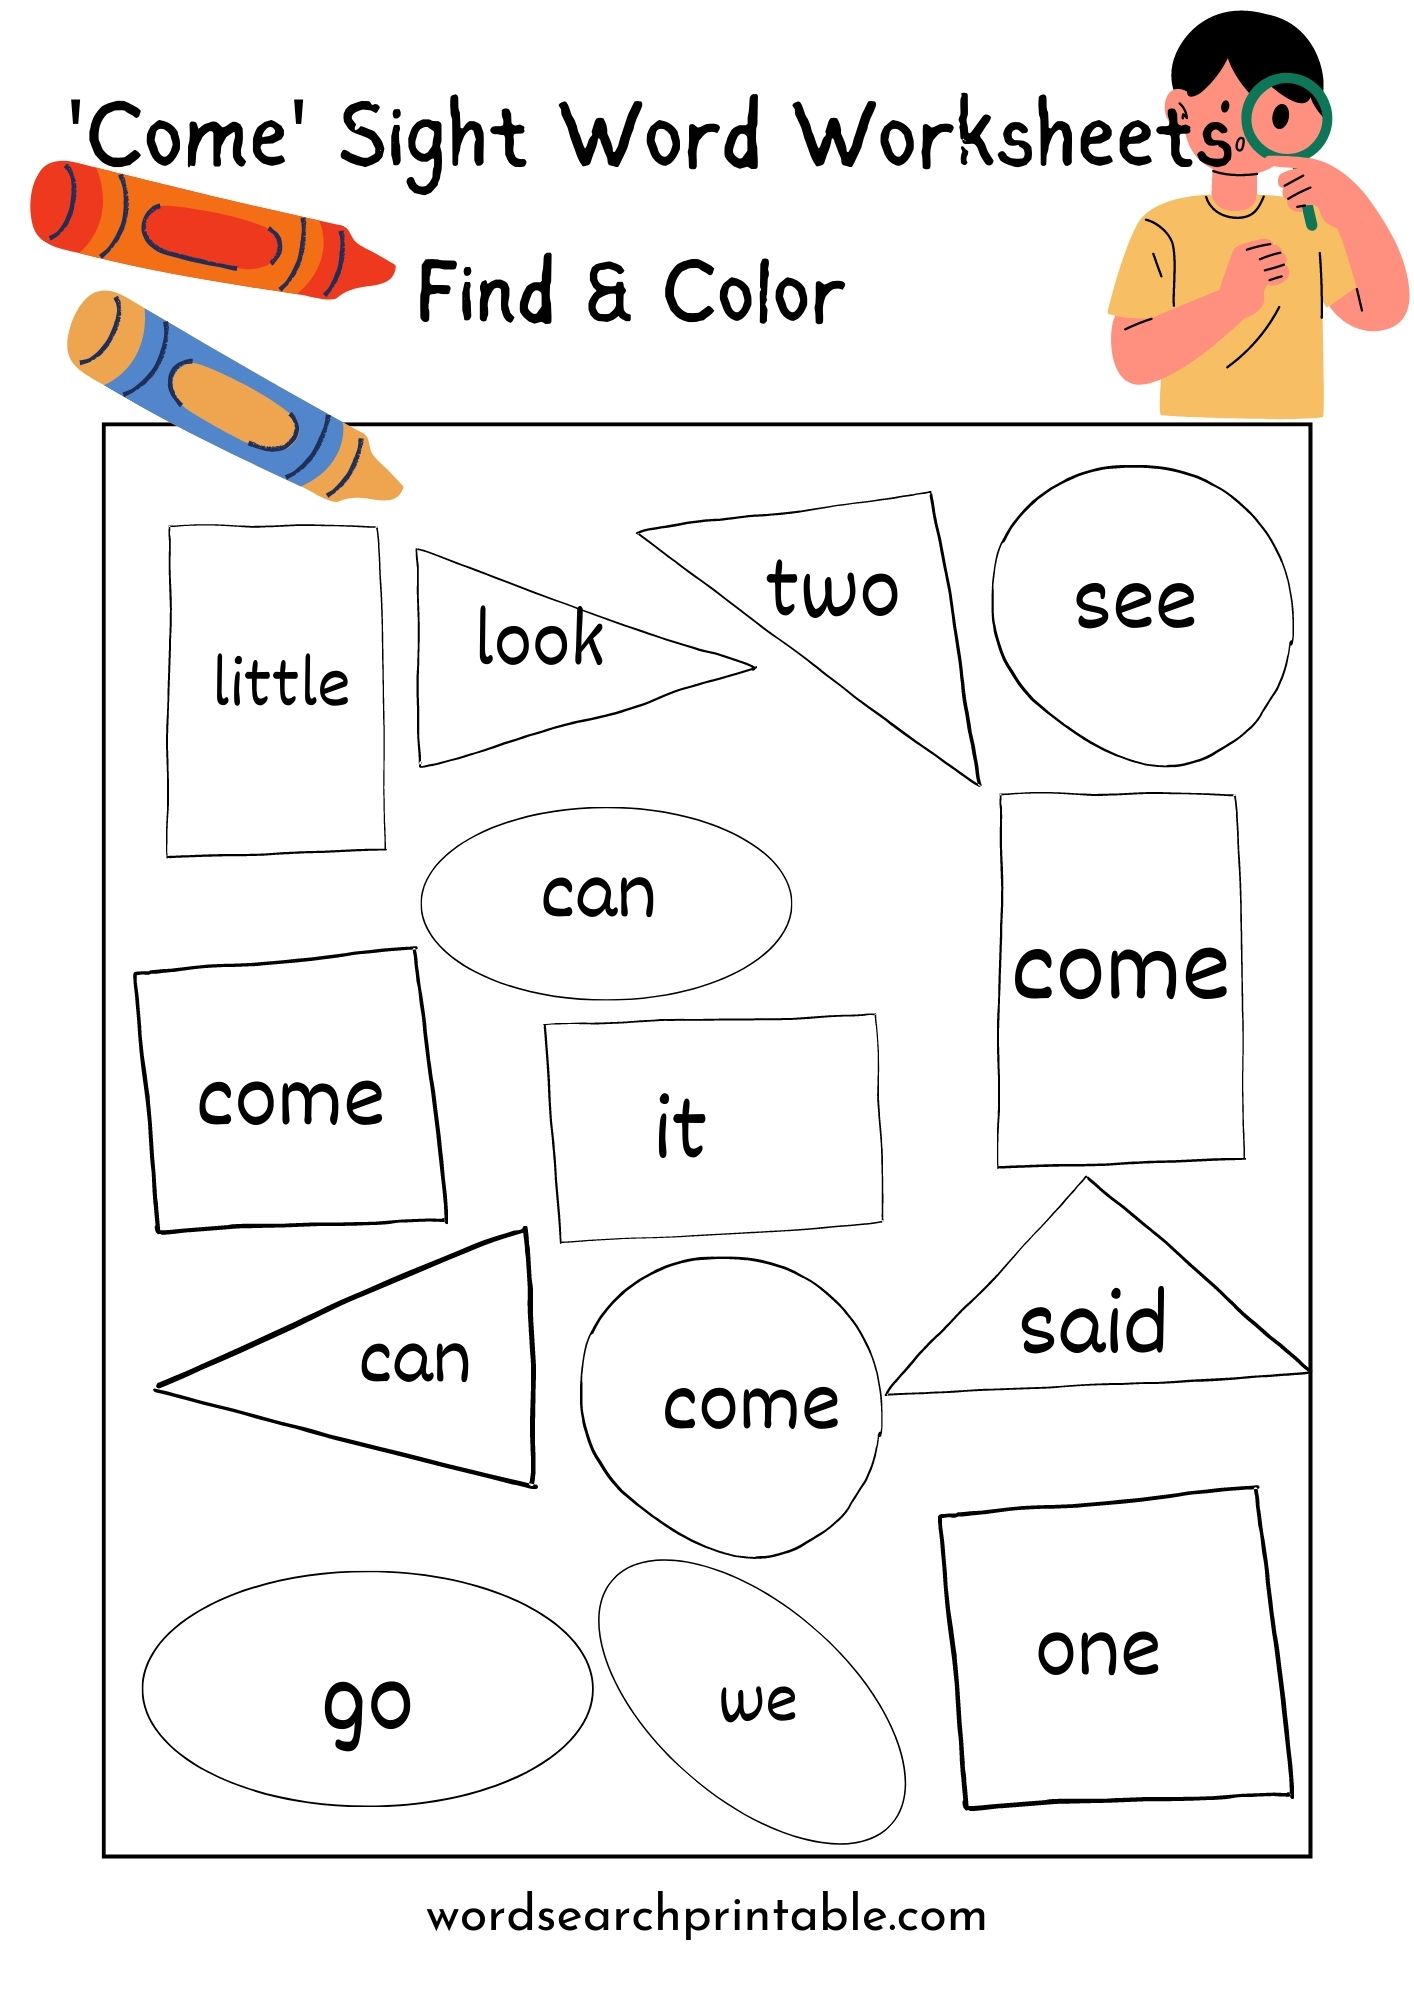 Find sight word Come and Color the geometric shape